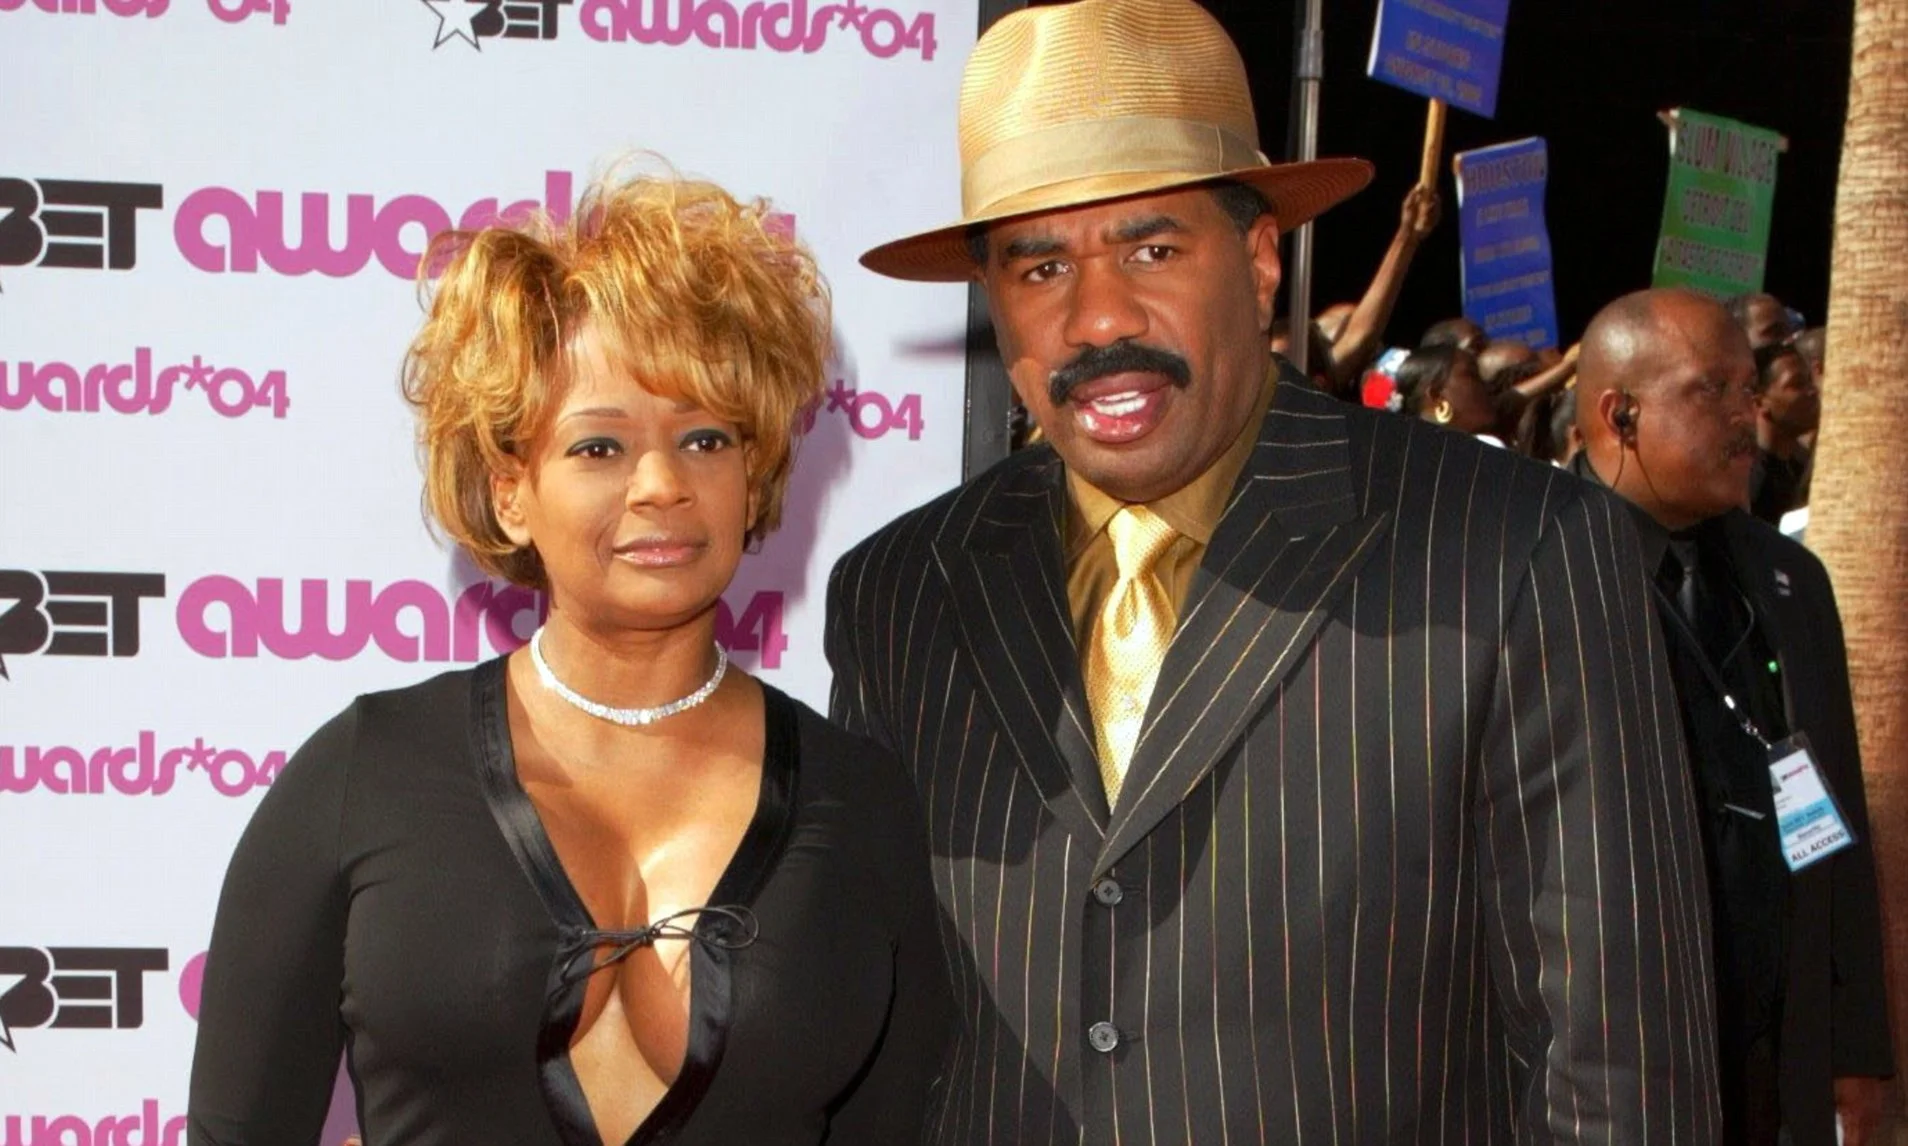 Who Is Mary Lee Harvey? Age, Bio, Career And More Of Ex-Wife Of Steve Harvey